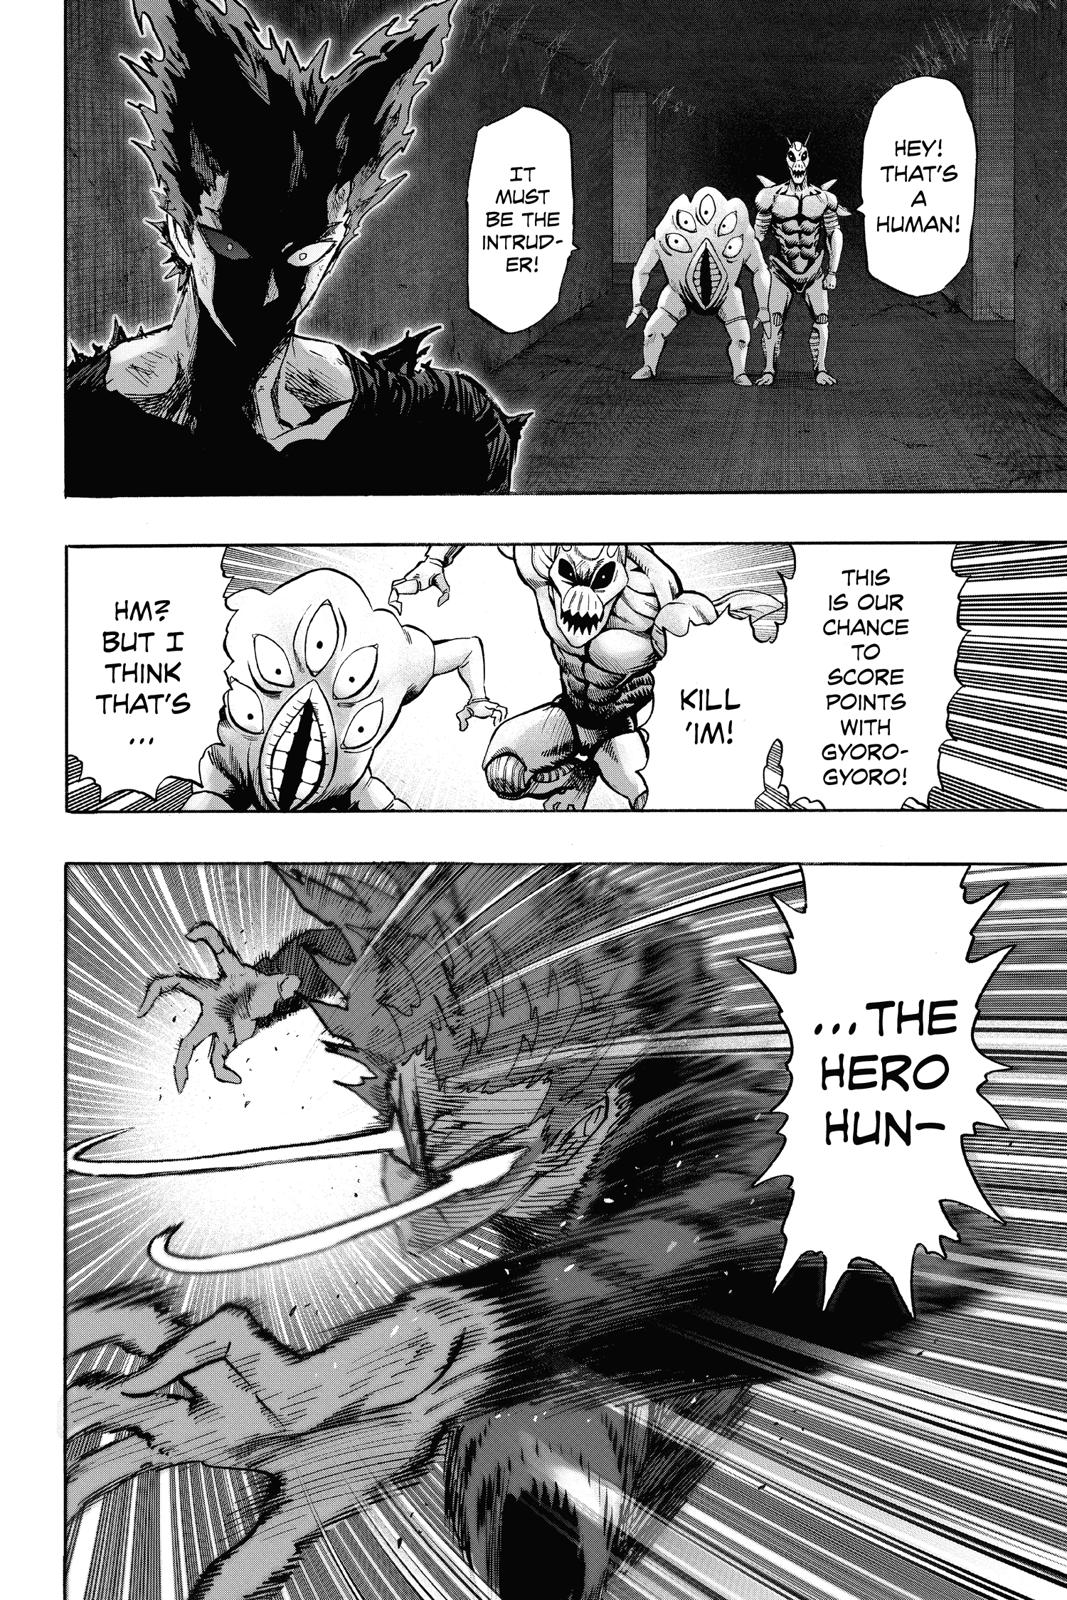 One-Punch Man, Punch 92 image 41